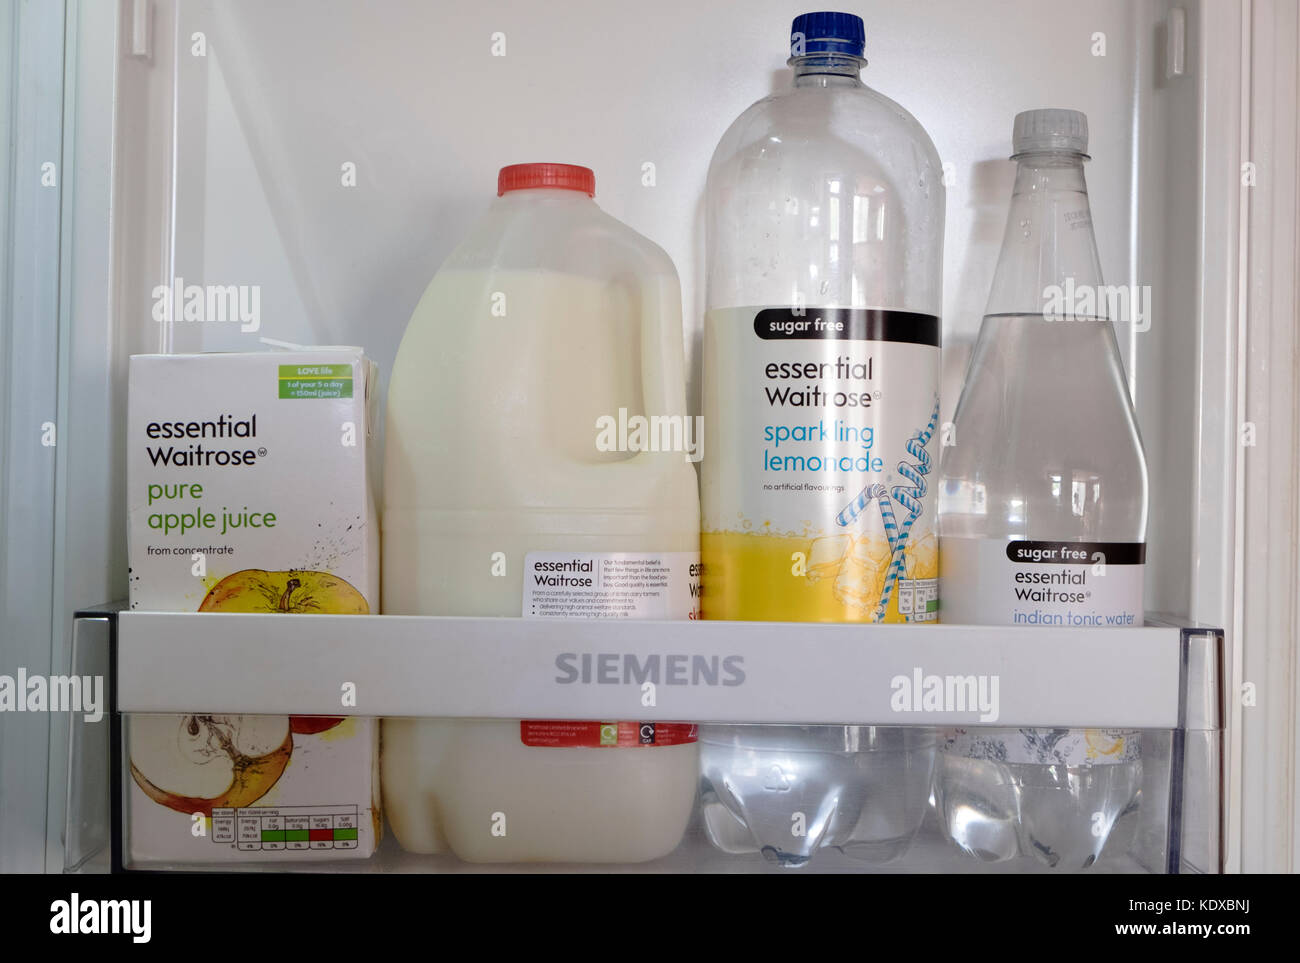 Essential Waitrose drink products in a fridge Stock Photo